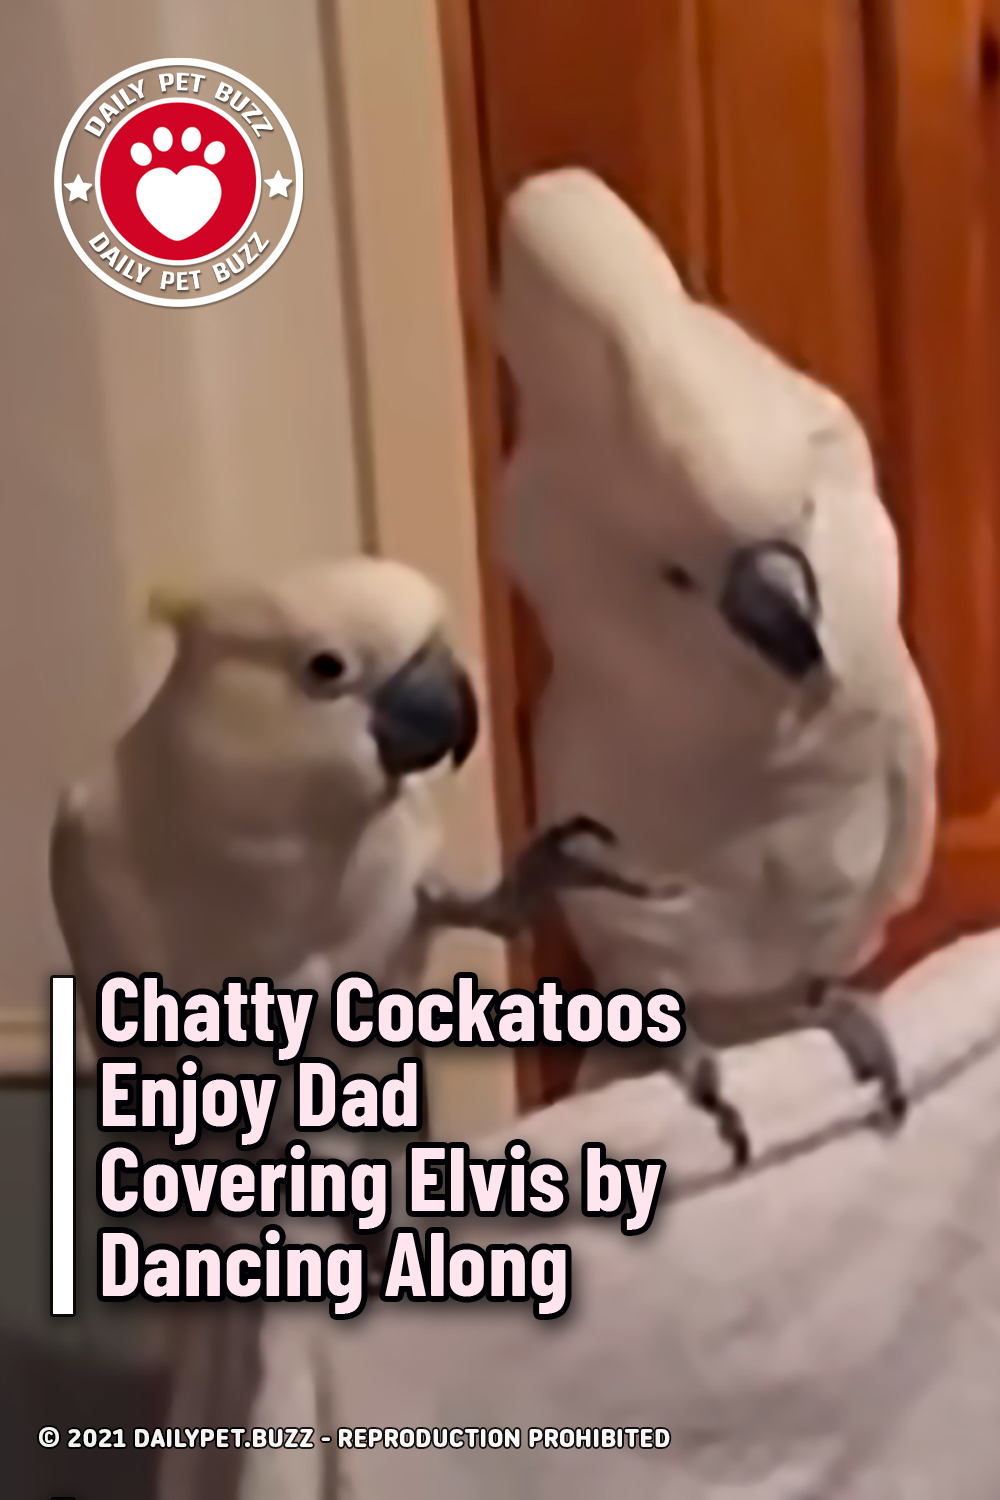 Chatty Cockatoos Enjoy Dad Covering Elvis by Dancing Along